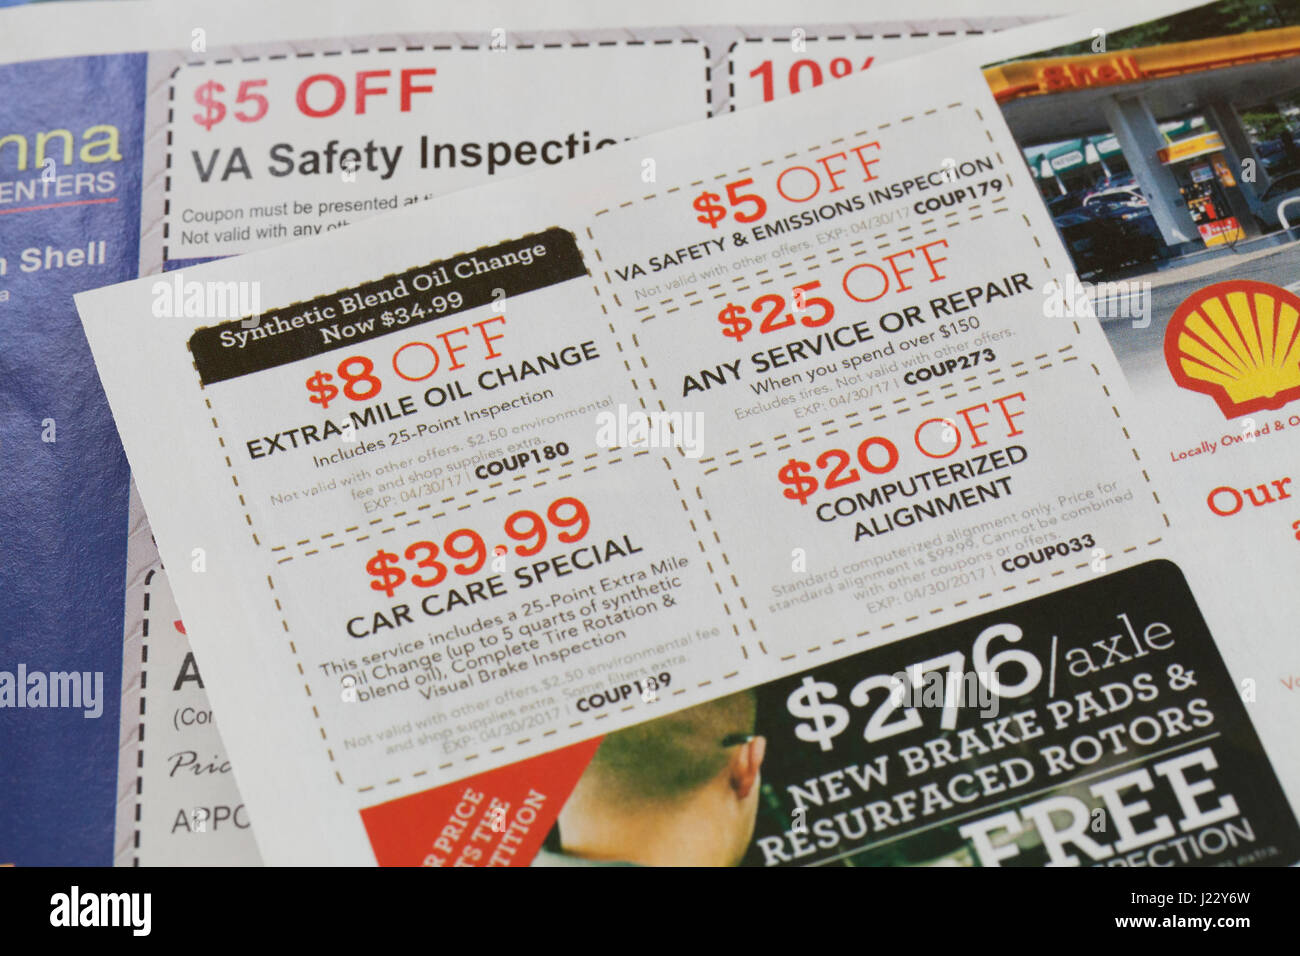 Car maintenance service coupons in weekly mailer - USA Stock Photo